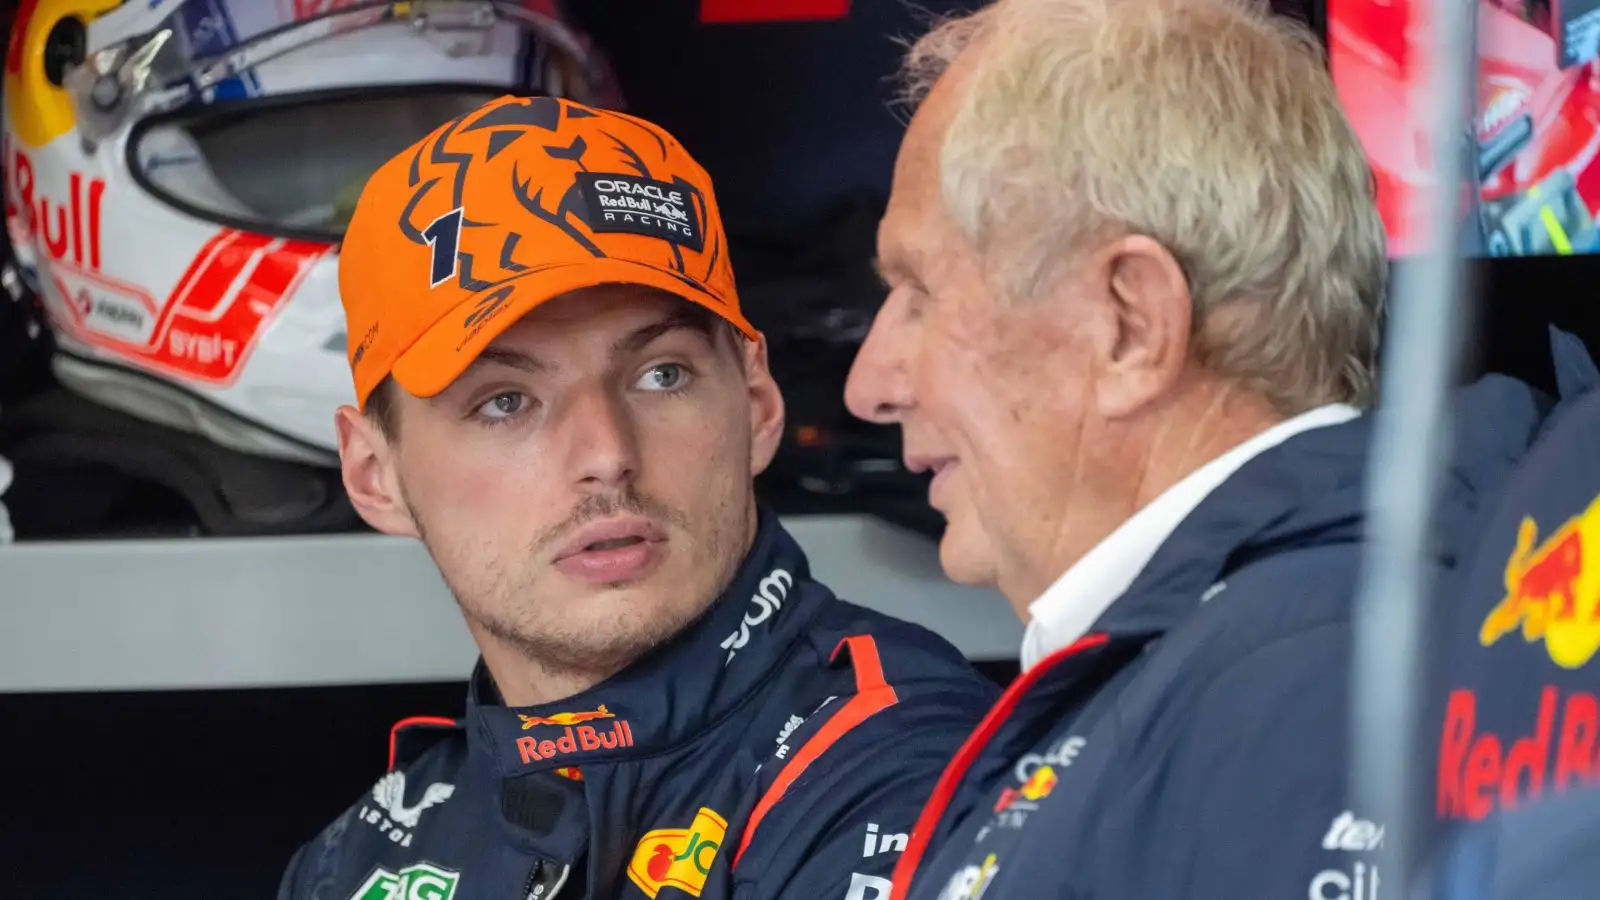 Max Verstappen in conversation with Helmut Marko in the Red Bull garage at the 2023 Belgian Grand Prix.